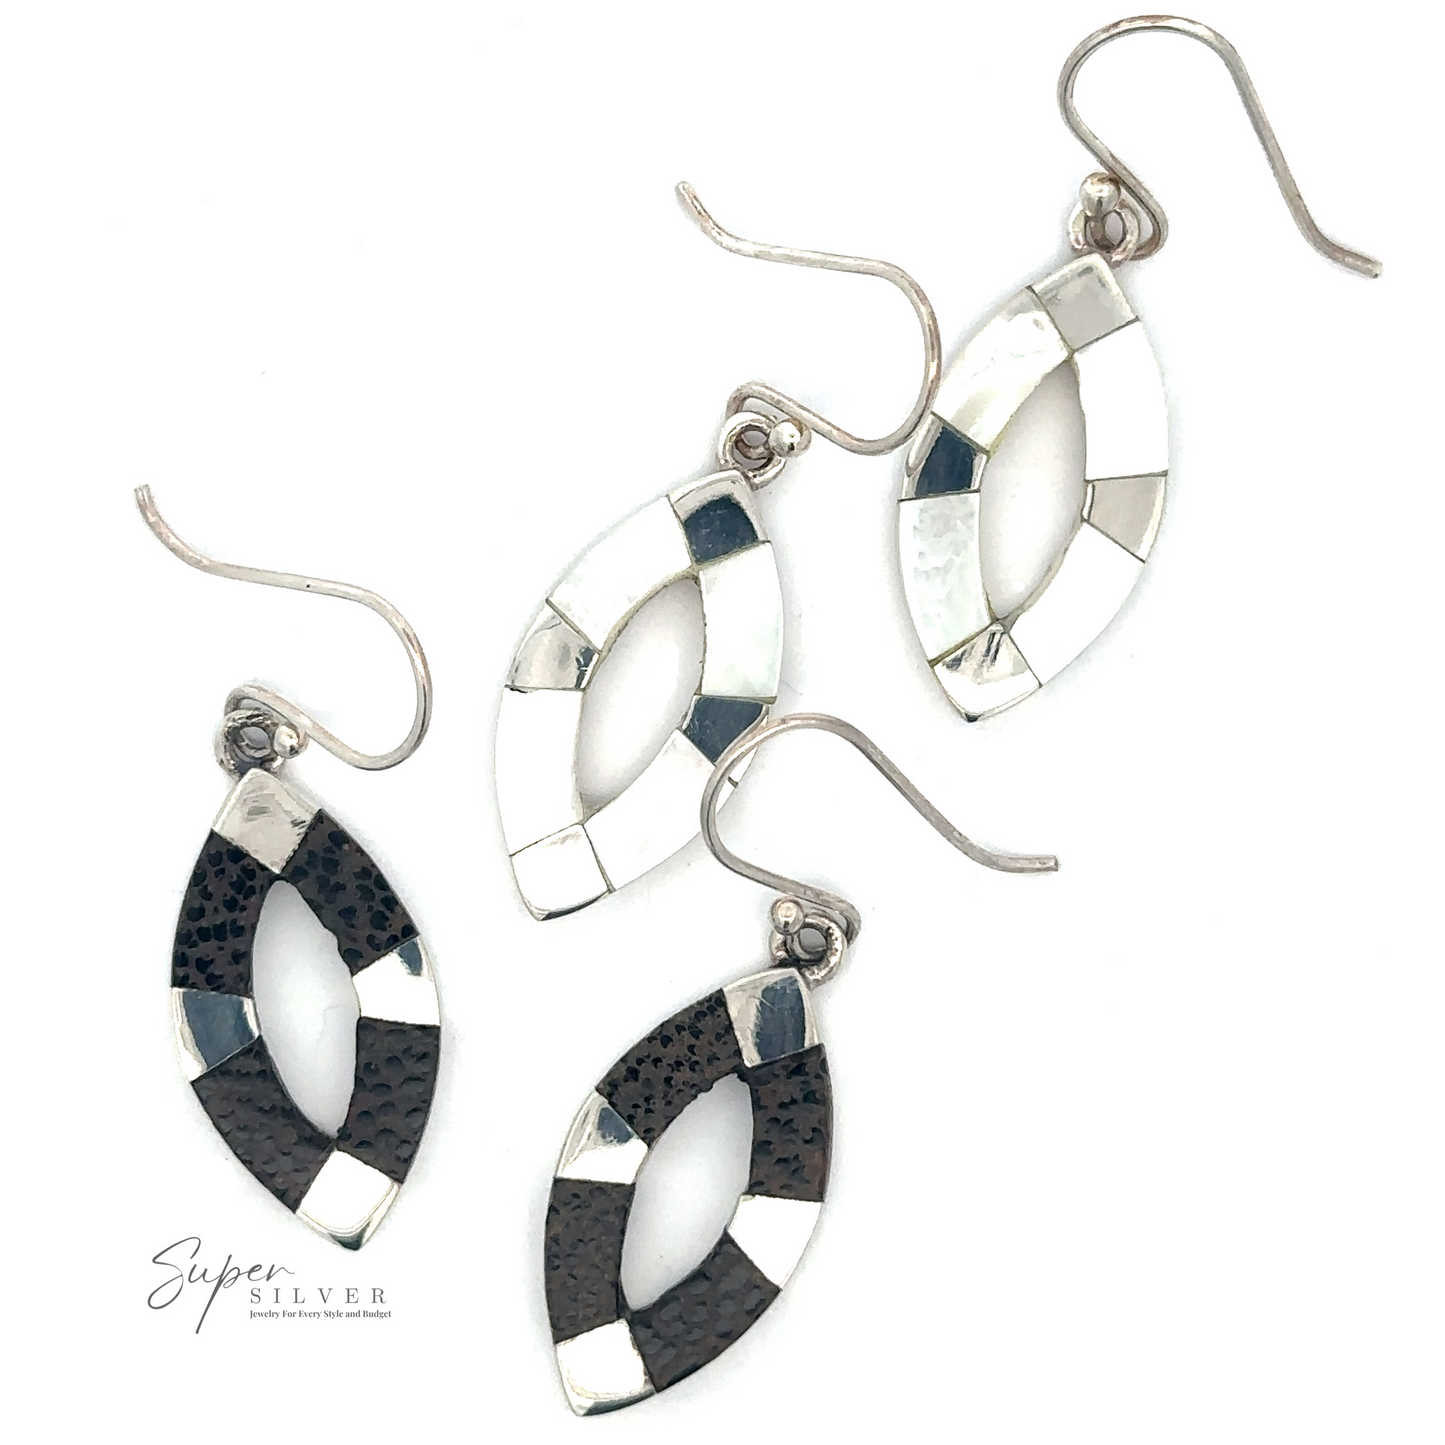 Two pairs of Inlaid Marquise Dangle Earrings; one pair features a striking combination of black and silver segments, while the other dazzles with white and silver segments, reminiscent of elegant mother of pearl earrings.